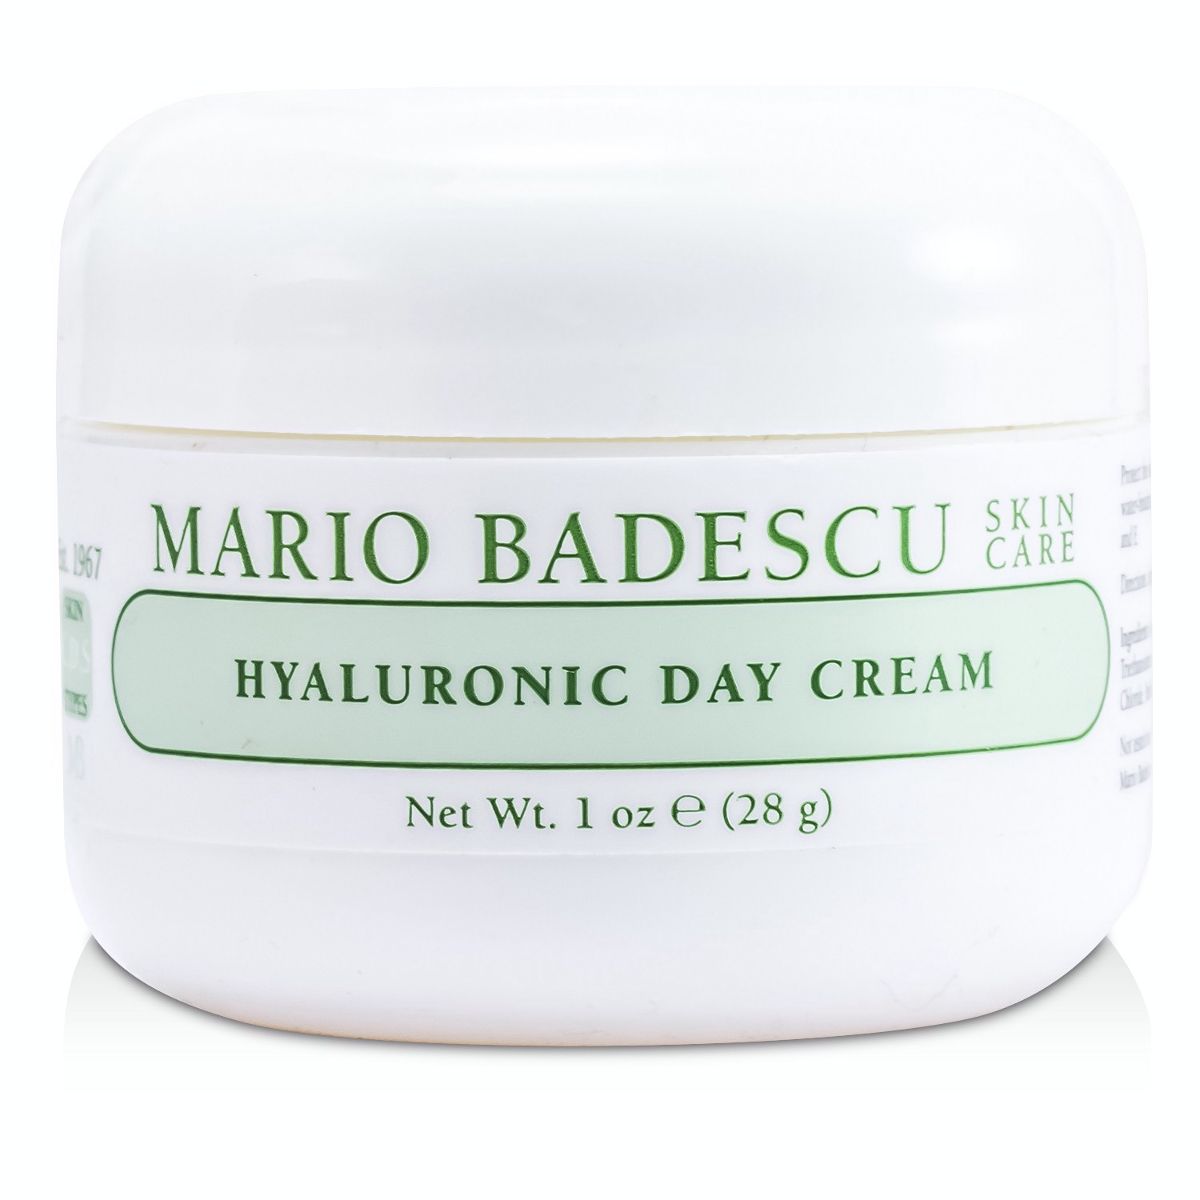 Hyaluronic Day Cream - For Combination/ Dry/ Sensitive Skin Types Mario Badescu Image